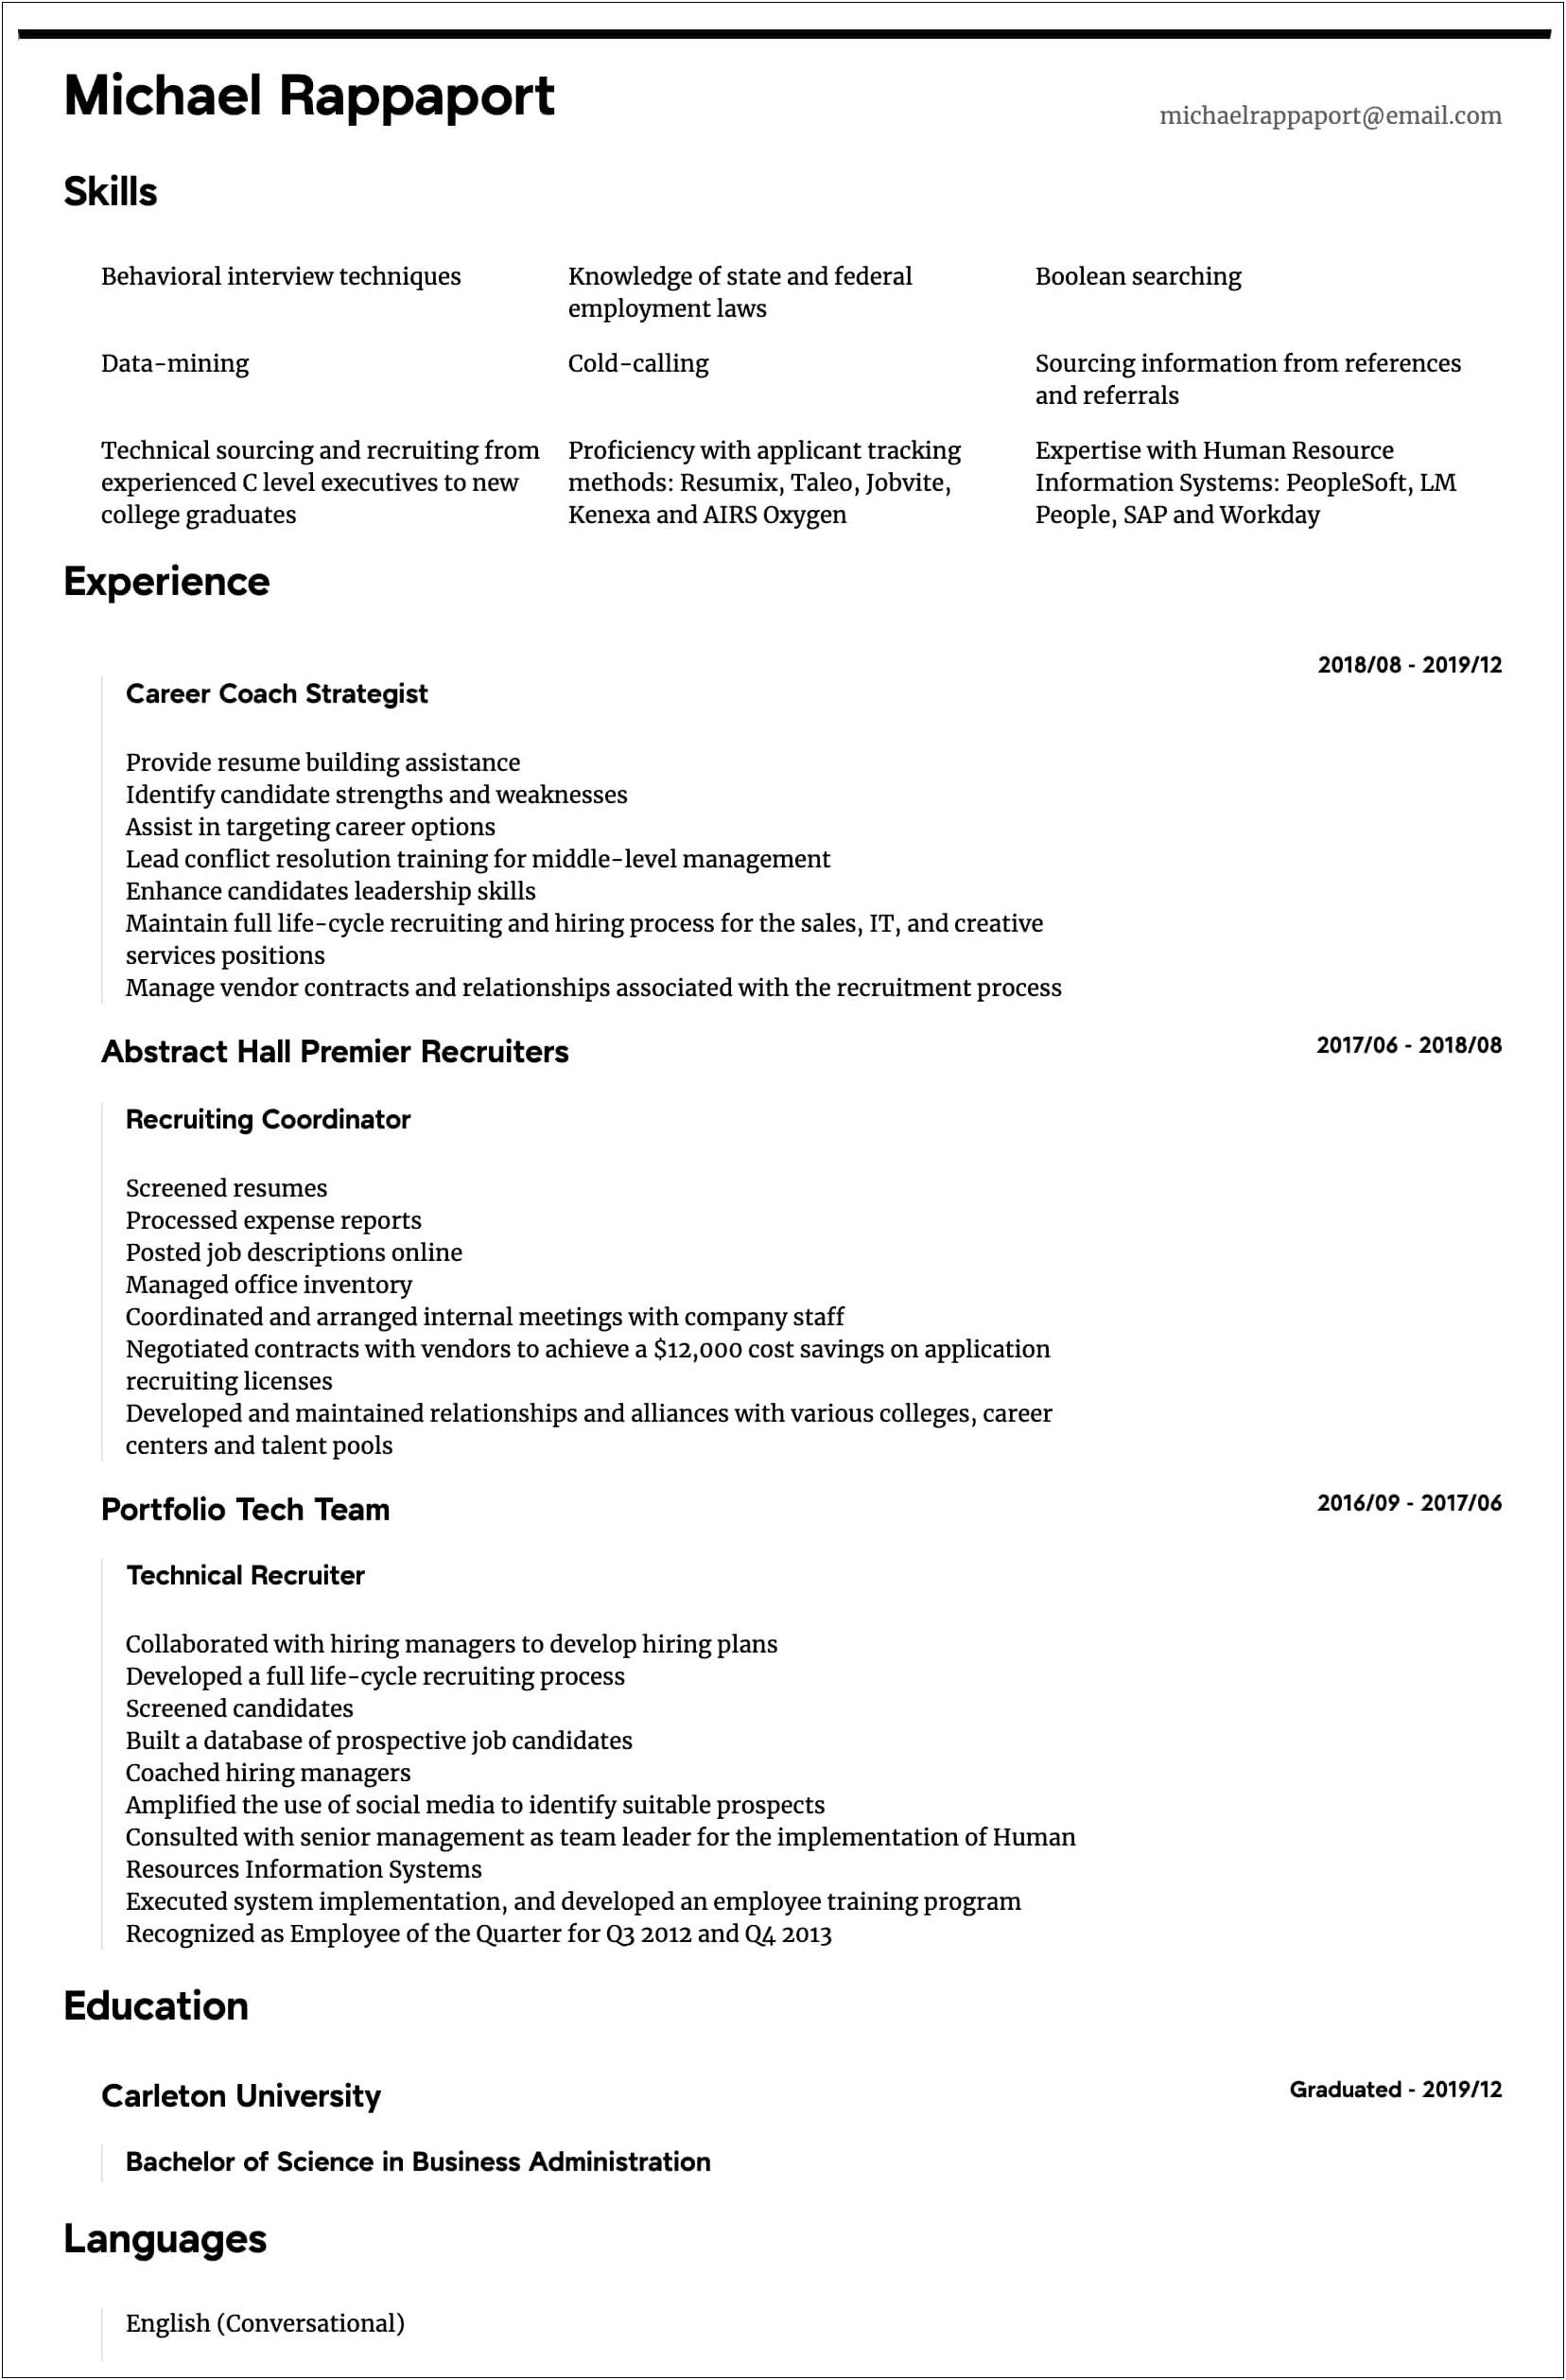 Resume For Recruiter Or Hiring Manager